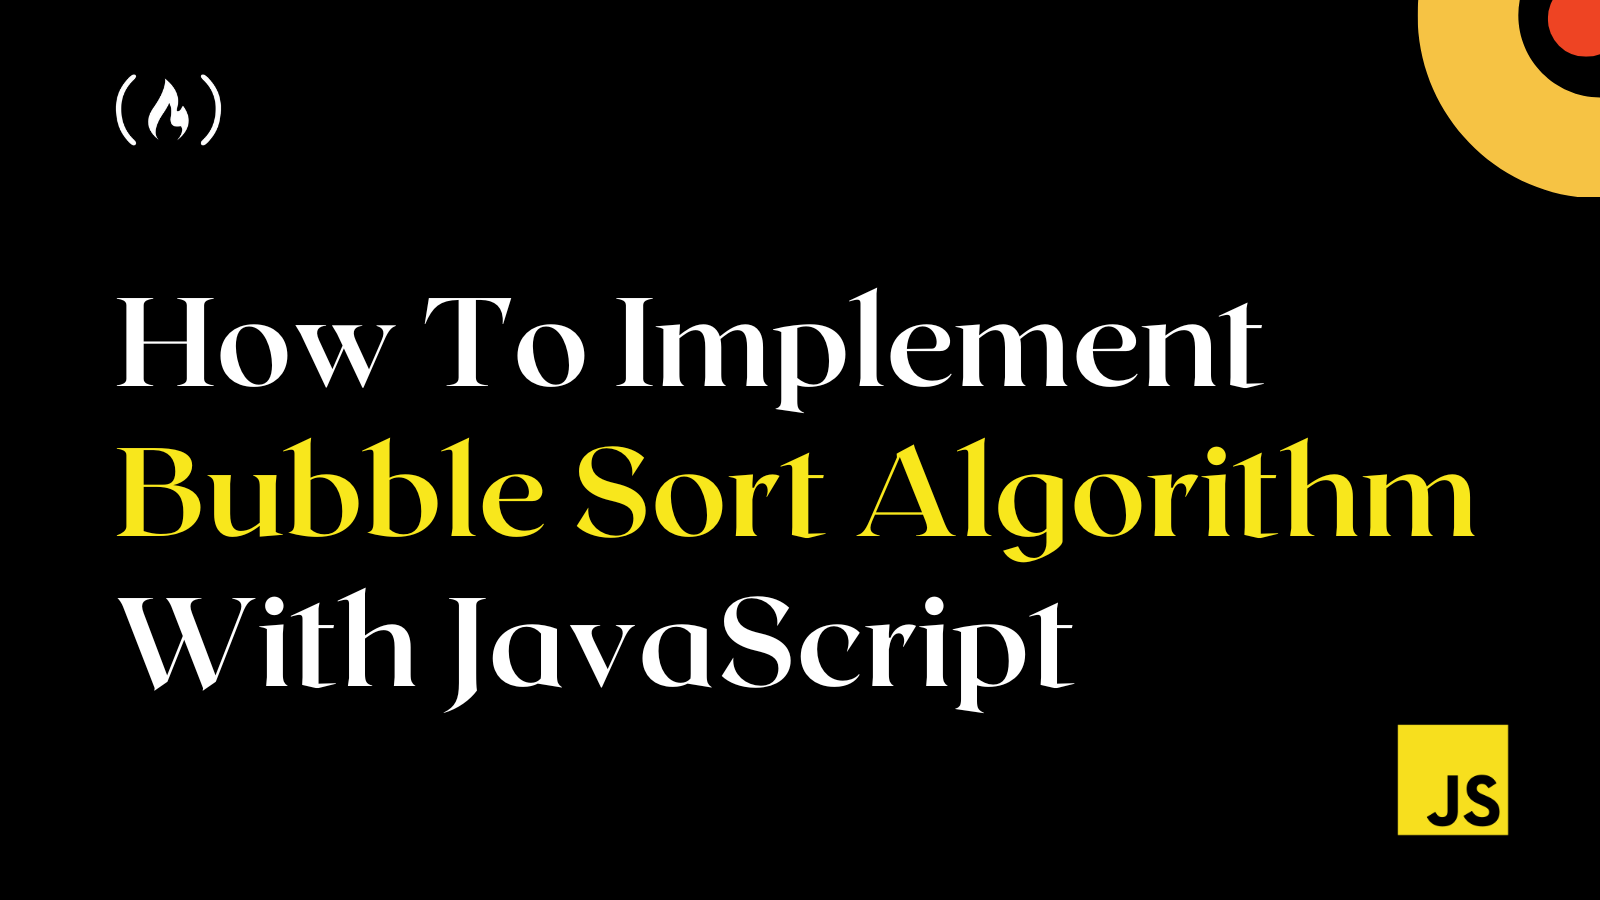 How To Implement Bubble Sort Algorithm With JavaScript